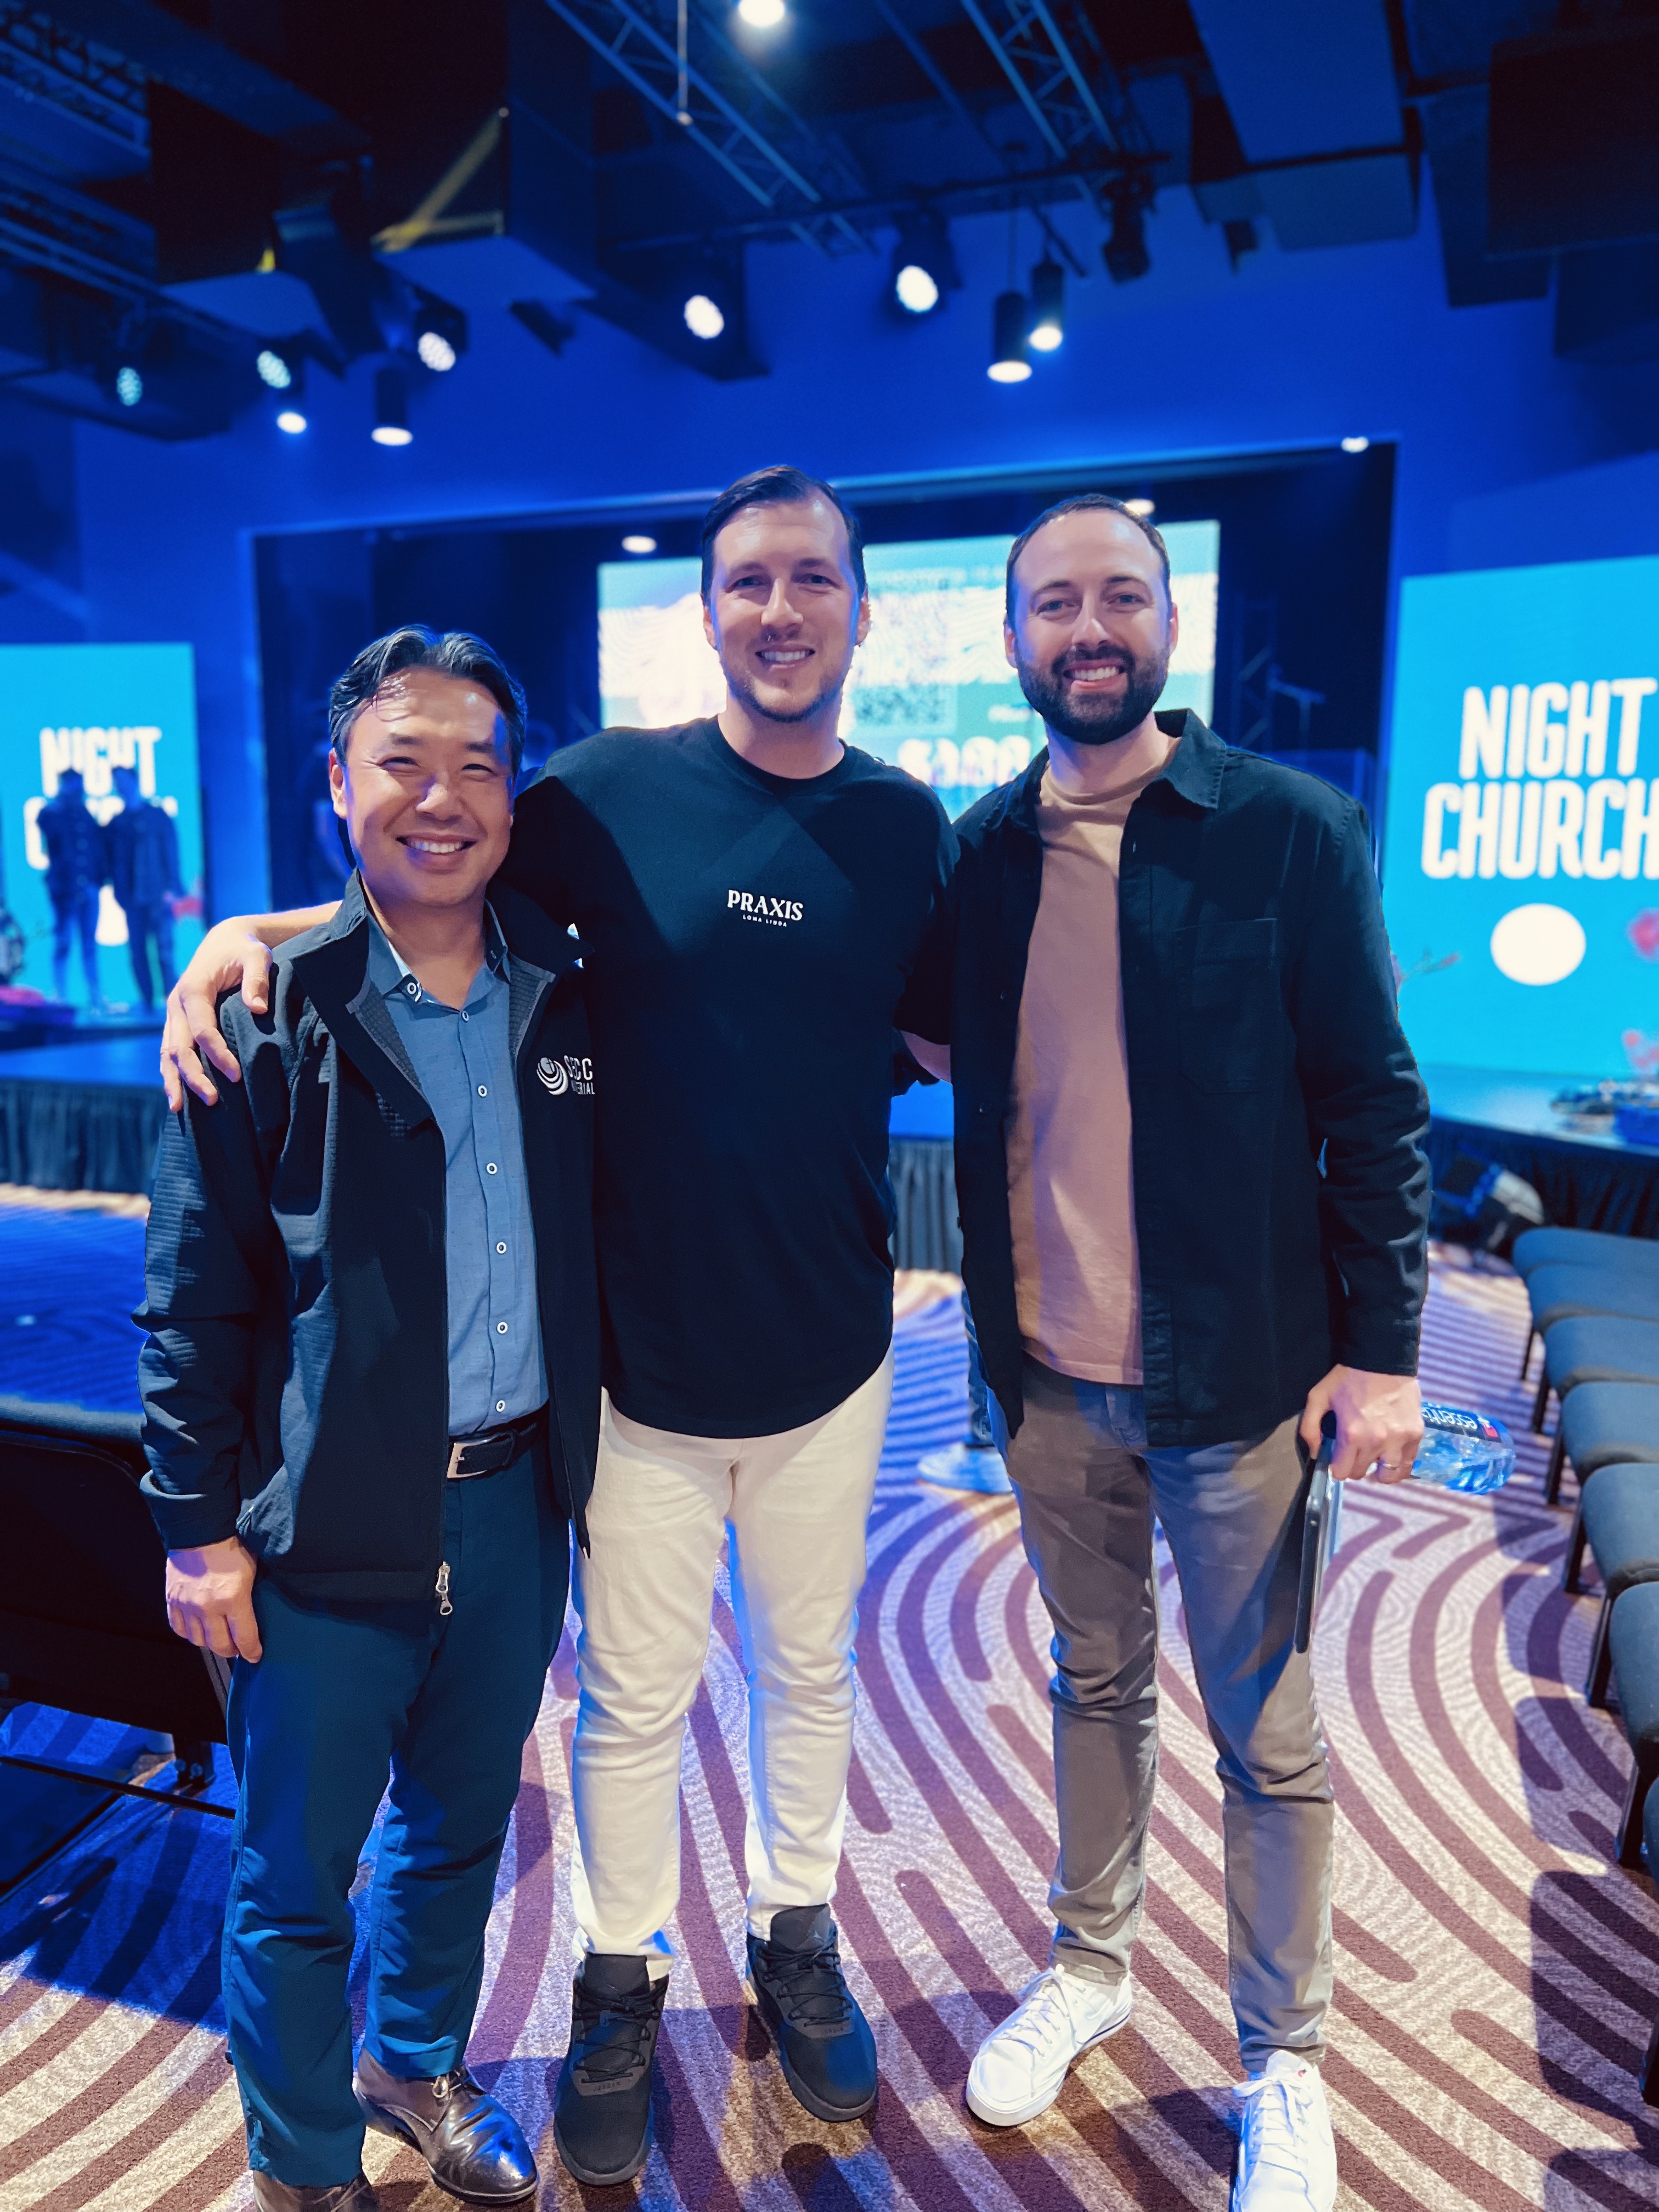 03 Jon Filip Aren.jpg – [L to R] Dr. Jonathan Park, SECC President; Dr. Filip Milosavljevic, LLUC Young Adult Pastor; and Pastor Aren Rennacker, SECC Youth and Young Adult Director, enjoy the Voices of the Young Friday service as part of the NAD’s Young Adult LIFE Tour.